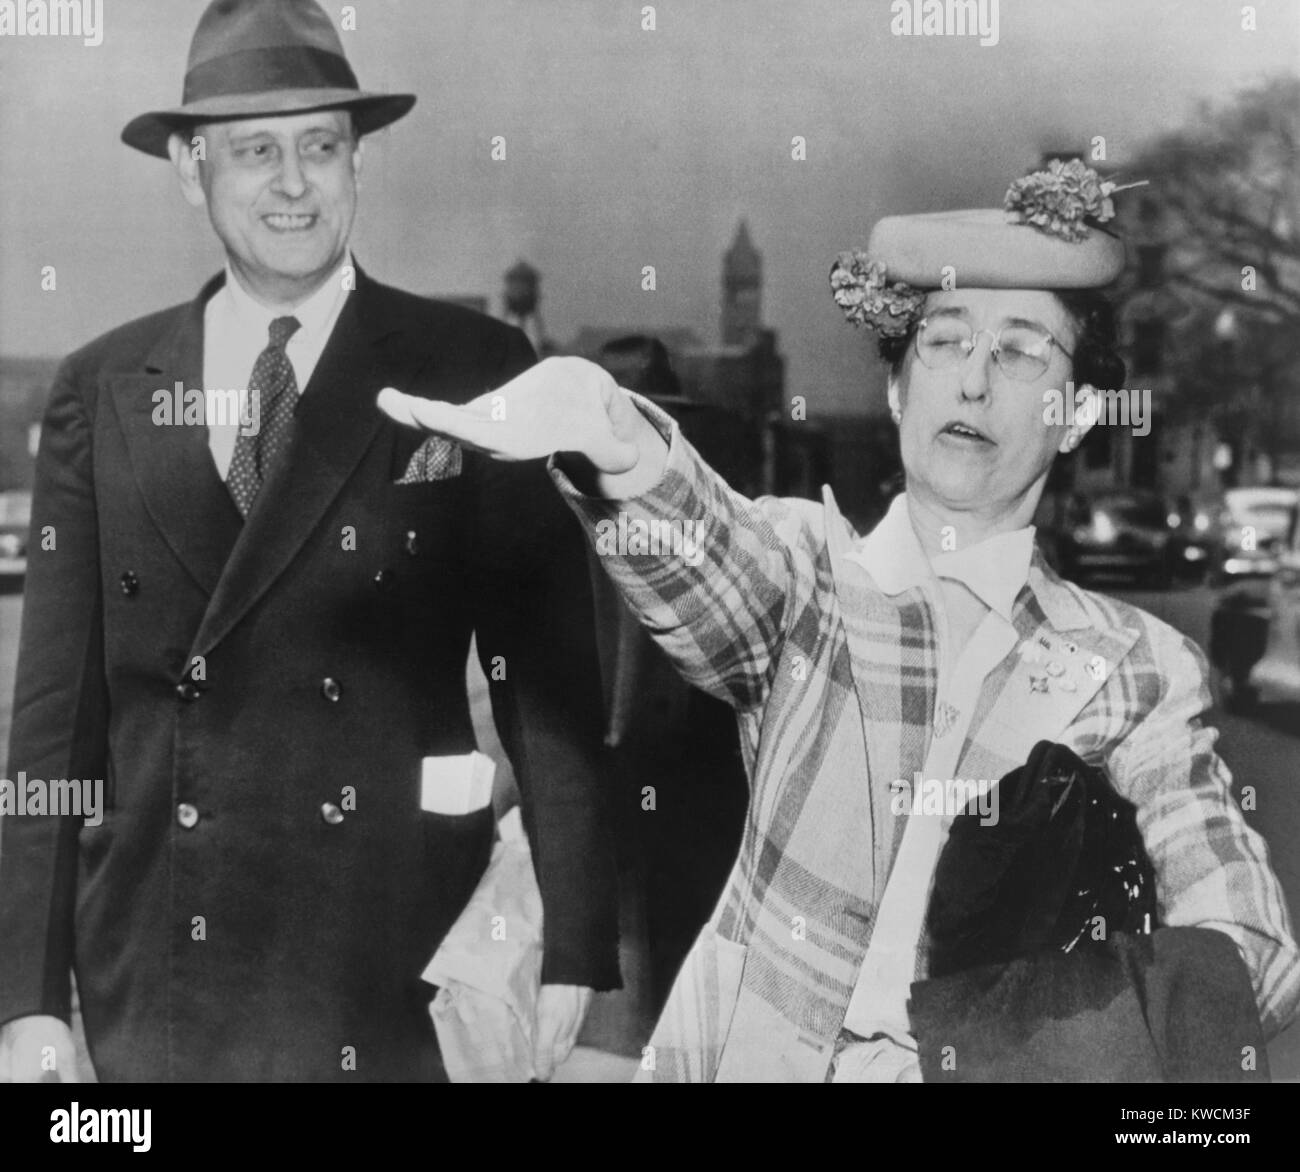 Lois de Lafayette Washburn gives a stiff-armed salute. She and Howard Victor Broenstrupp leave Federal District Court April 17, 1944 where both were among the 42 rightists indicted Great Sedition Trial of 1944. The Smith Act of 1940 was used unsuccessfully to prosecute the defendants. It was used later in the 1940s to indict and convict leaders of the U.S. Communist party. (BSLOC 2014 13 74) Stock Photo